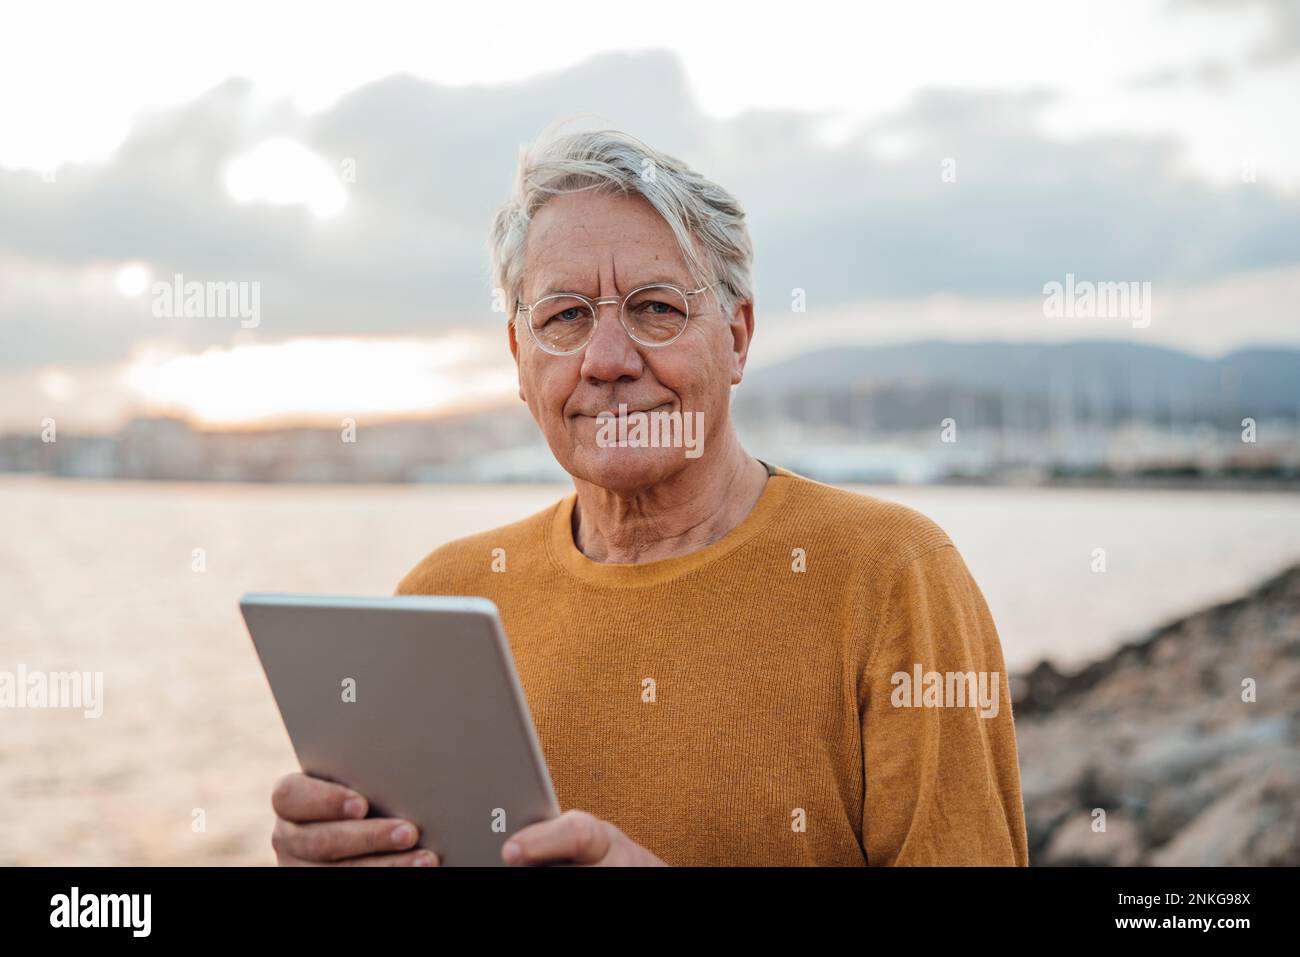 Smiling senior man standing with tablet computer Stock Photo